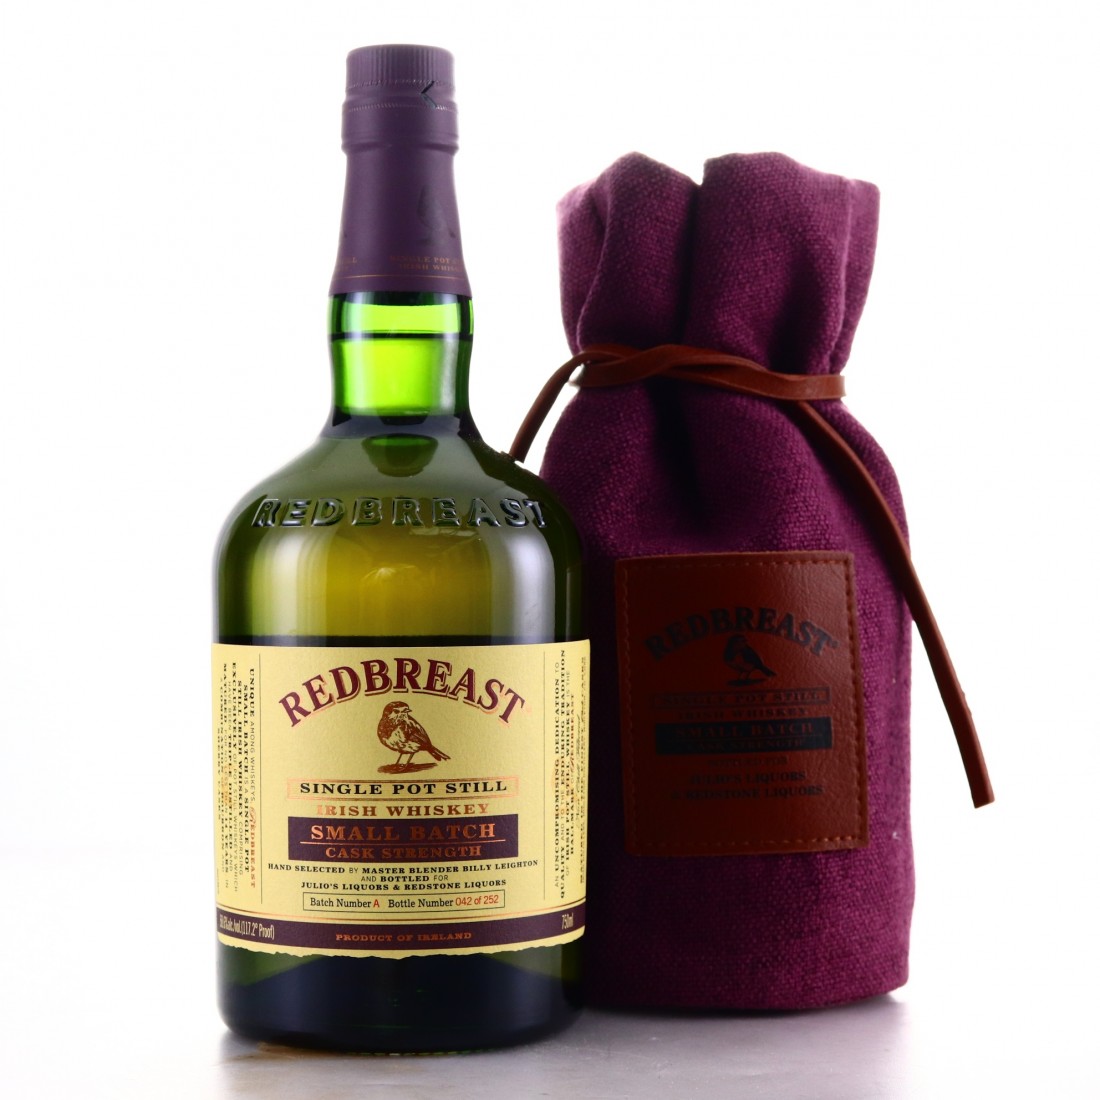 Review #128 – Redbreast Small Batch Cask Strength “A”